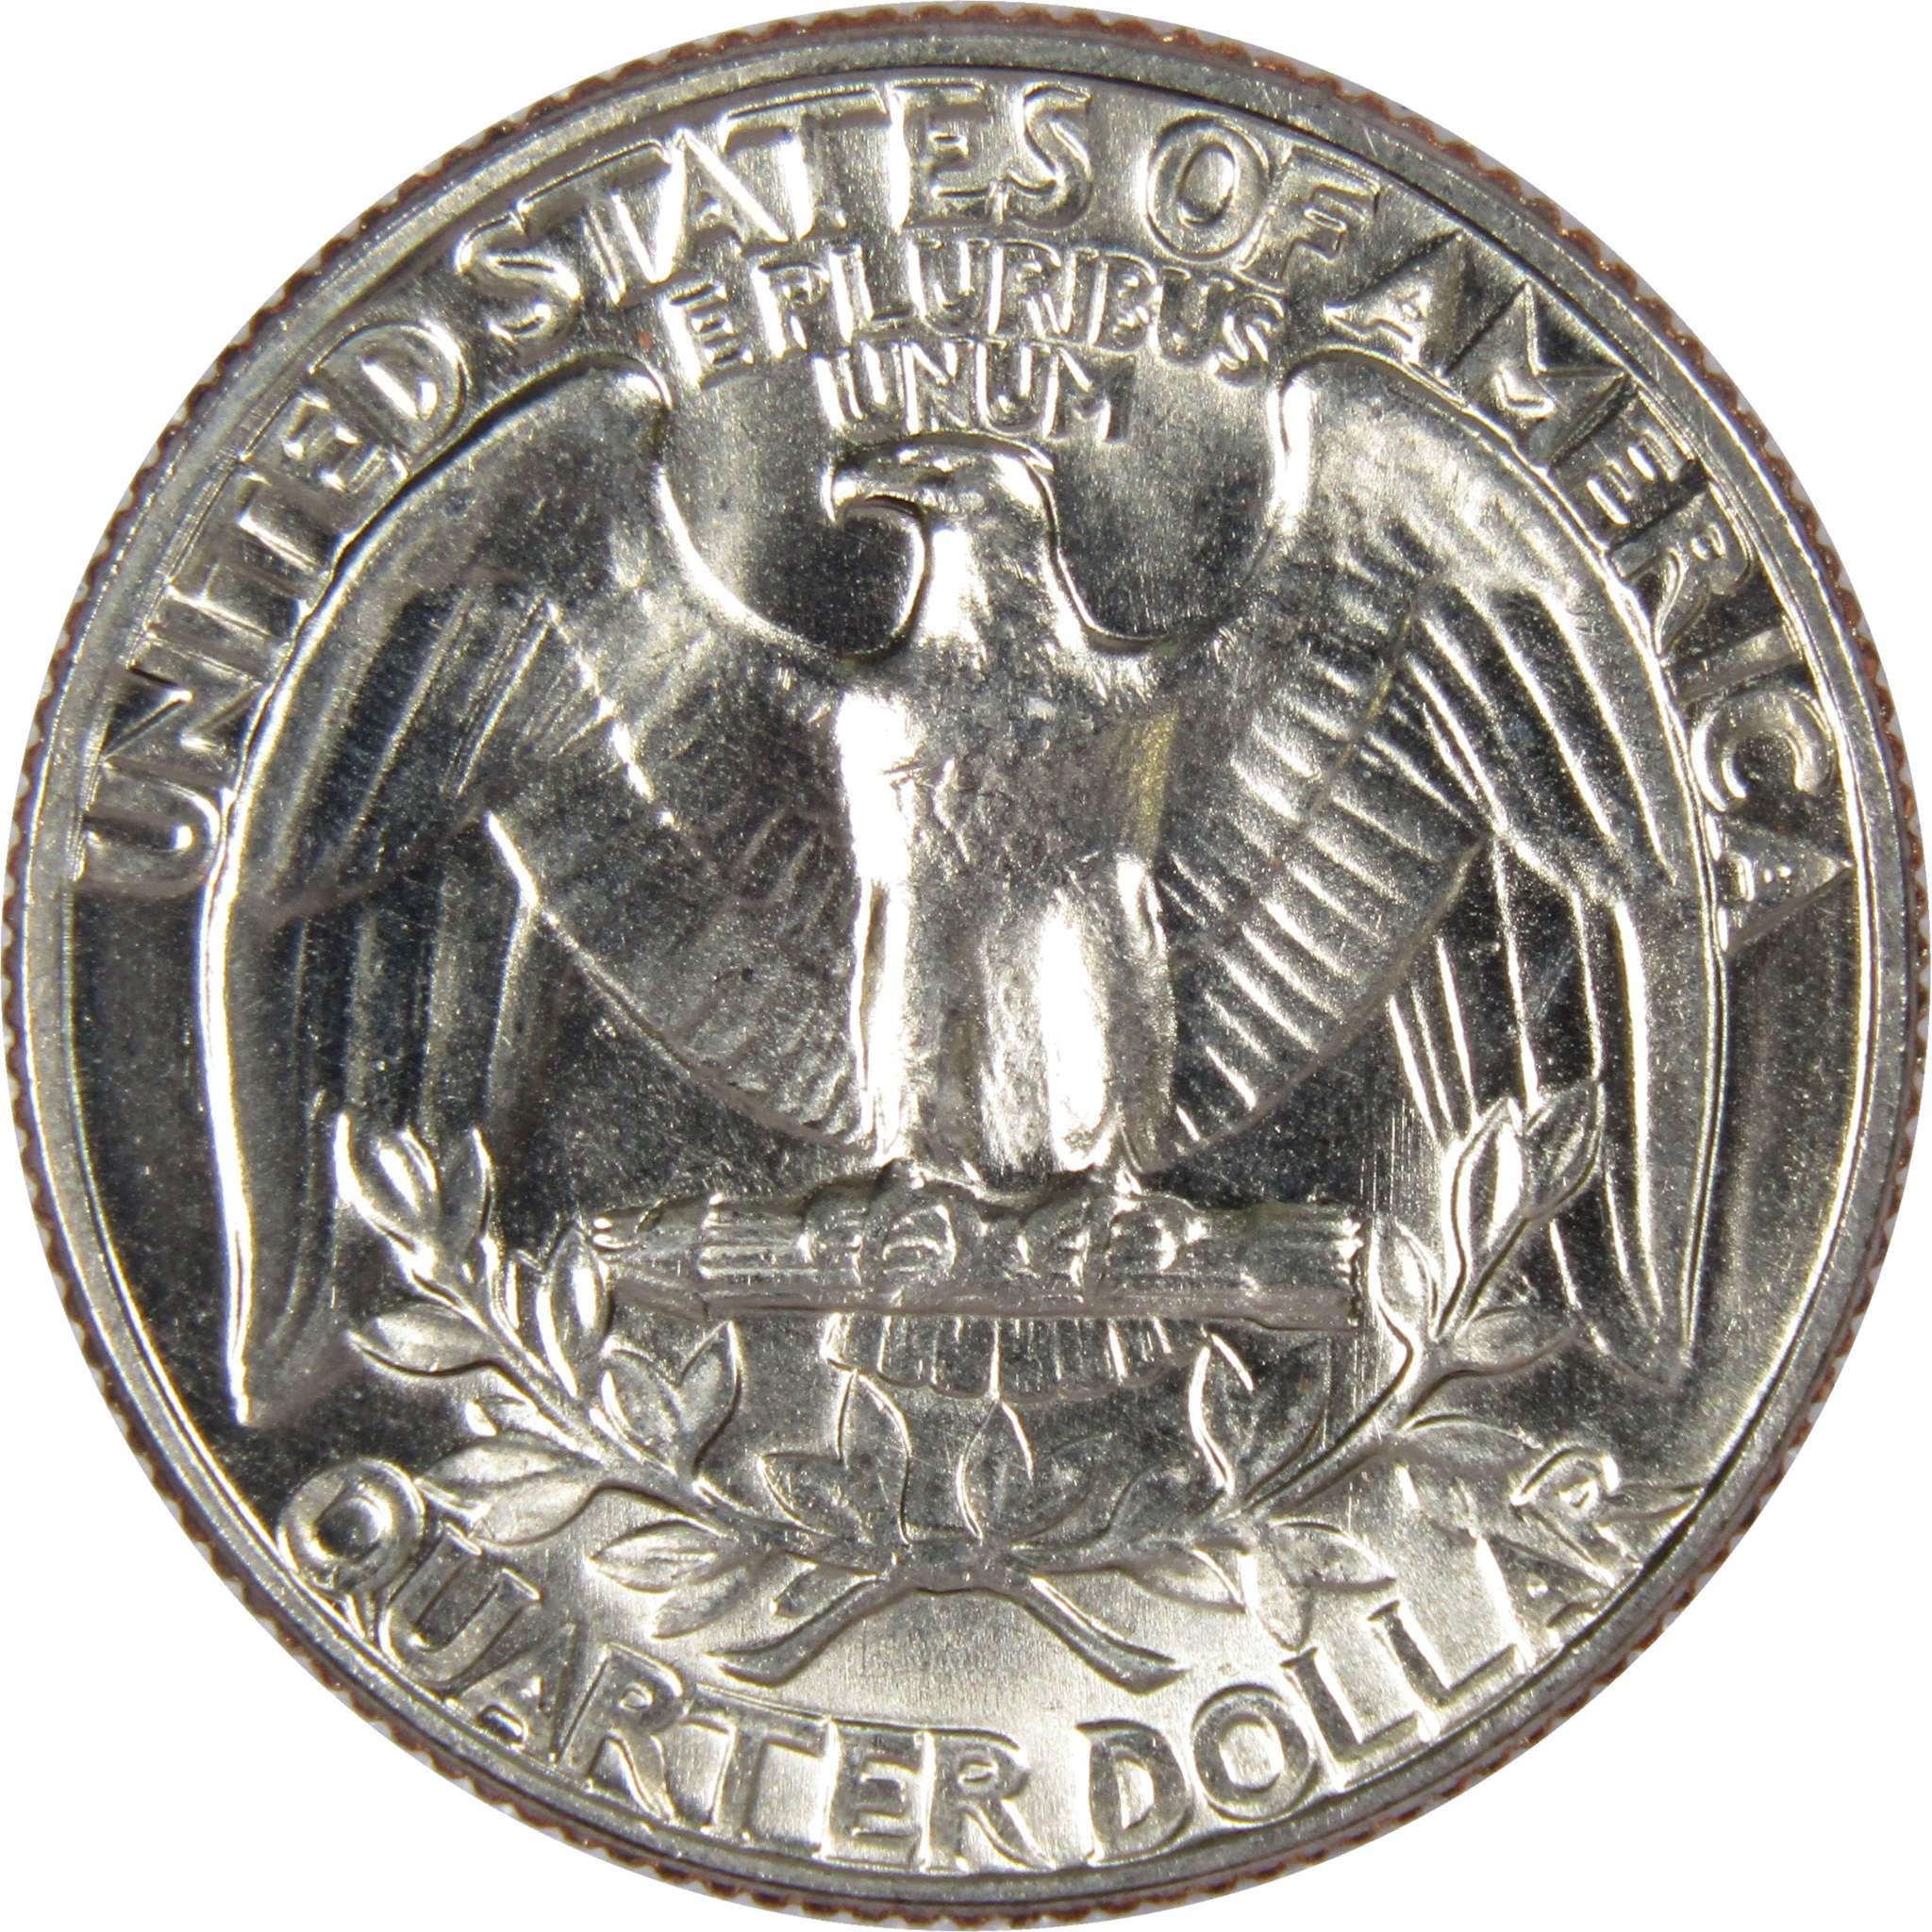 1972 D Washington Quarter BU Uncirculated Mint State 25c US Coin Collectible